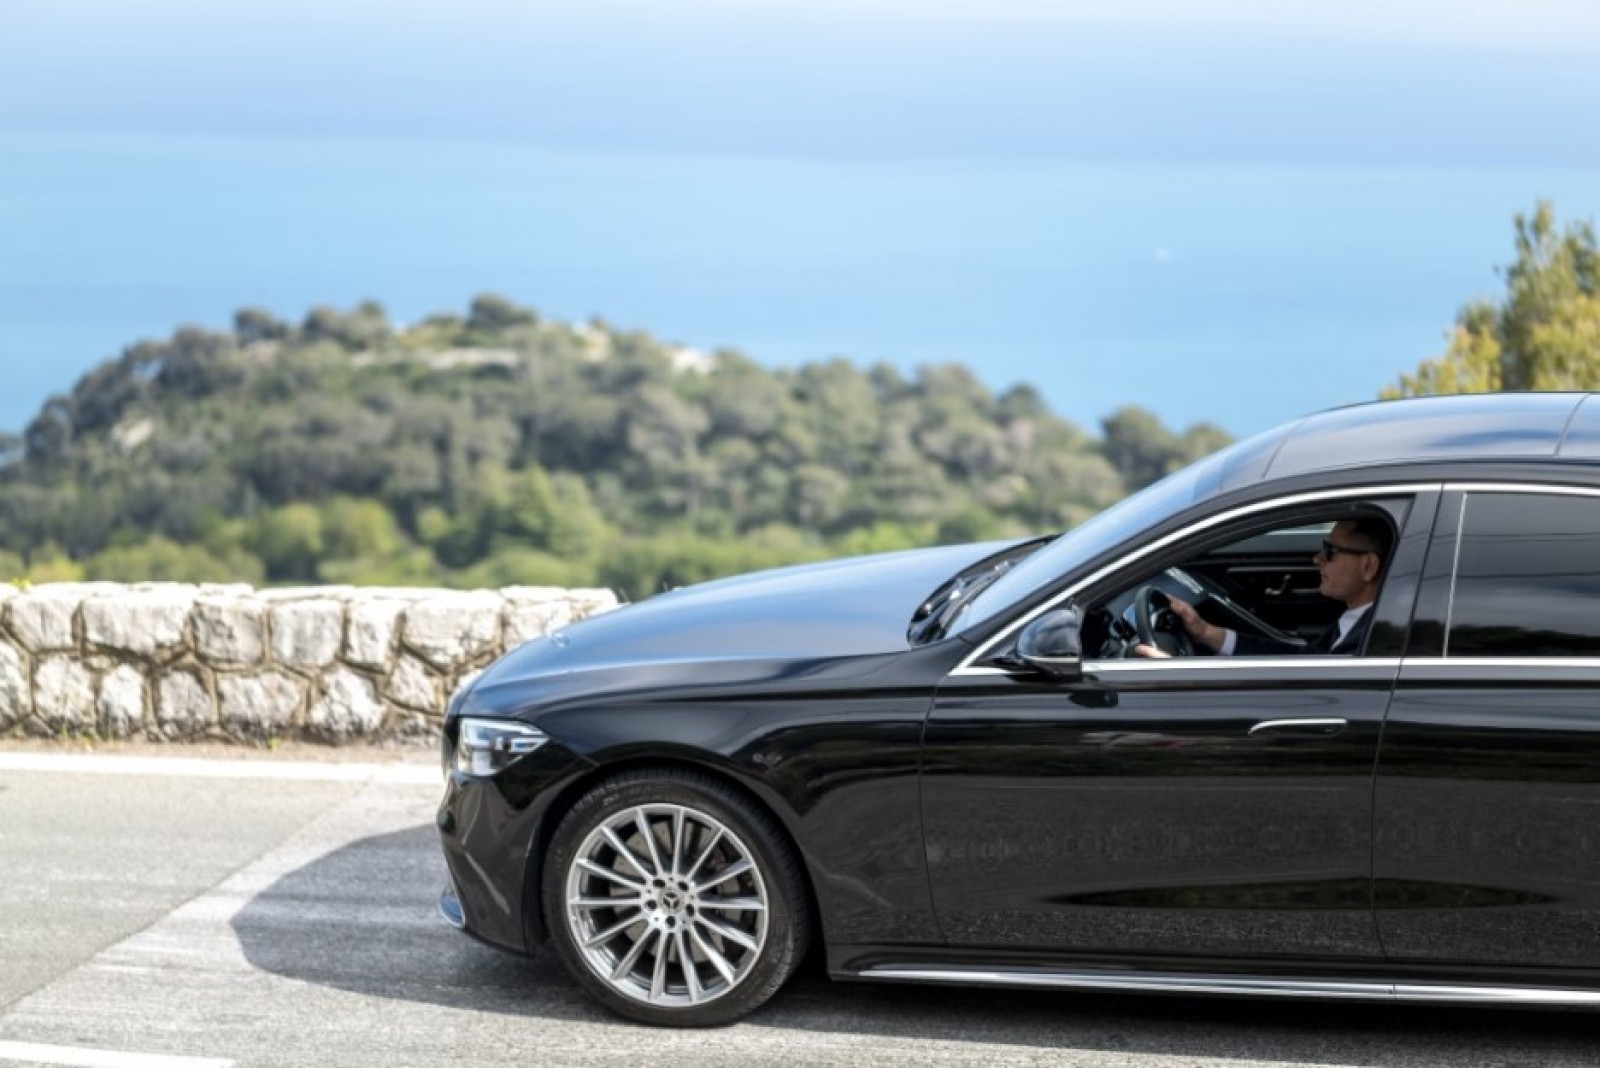 Chauffeur Service in Cannes | Nice | St Tropez – 24/7 – Private Driver – Ruby Services